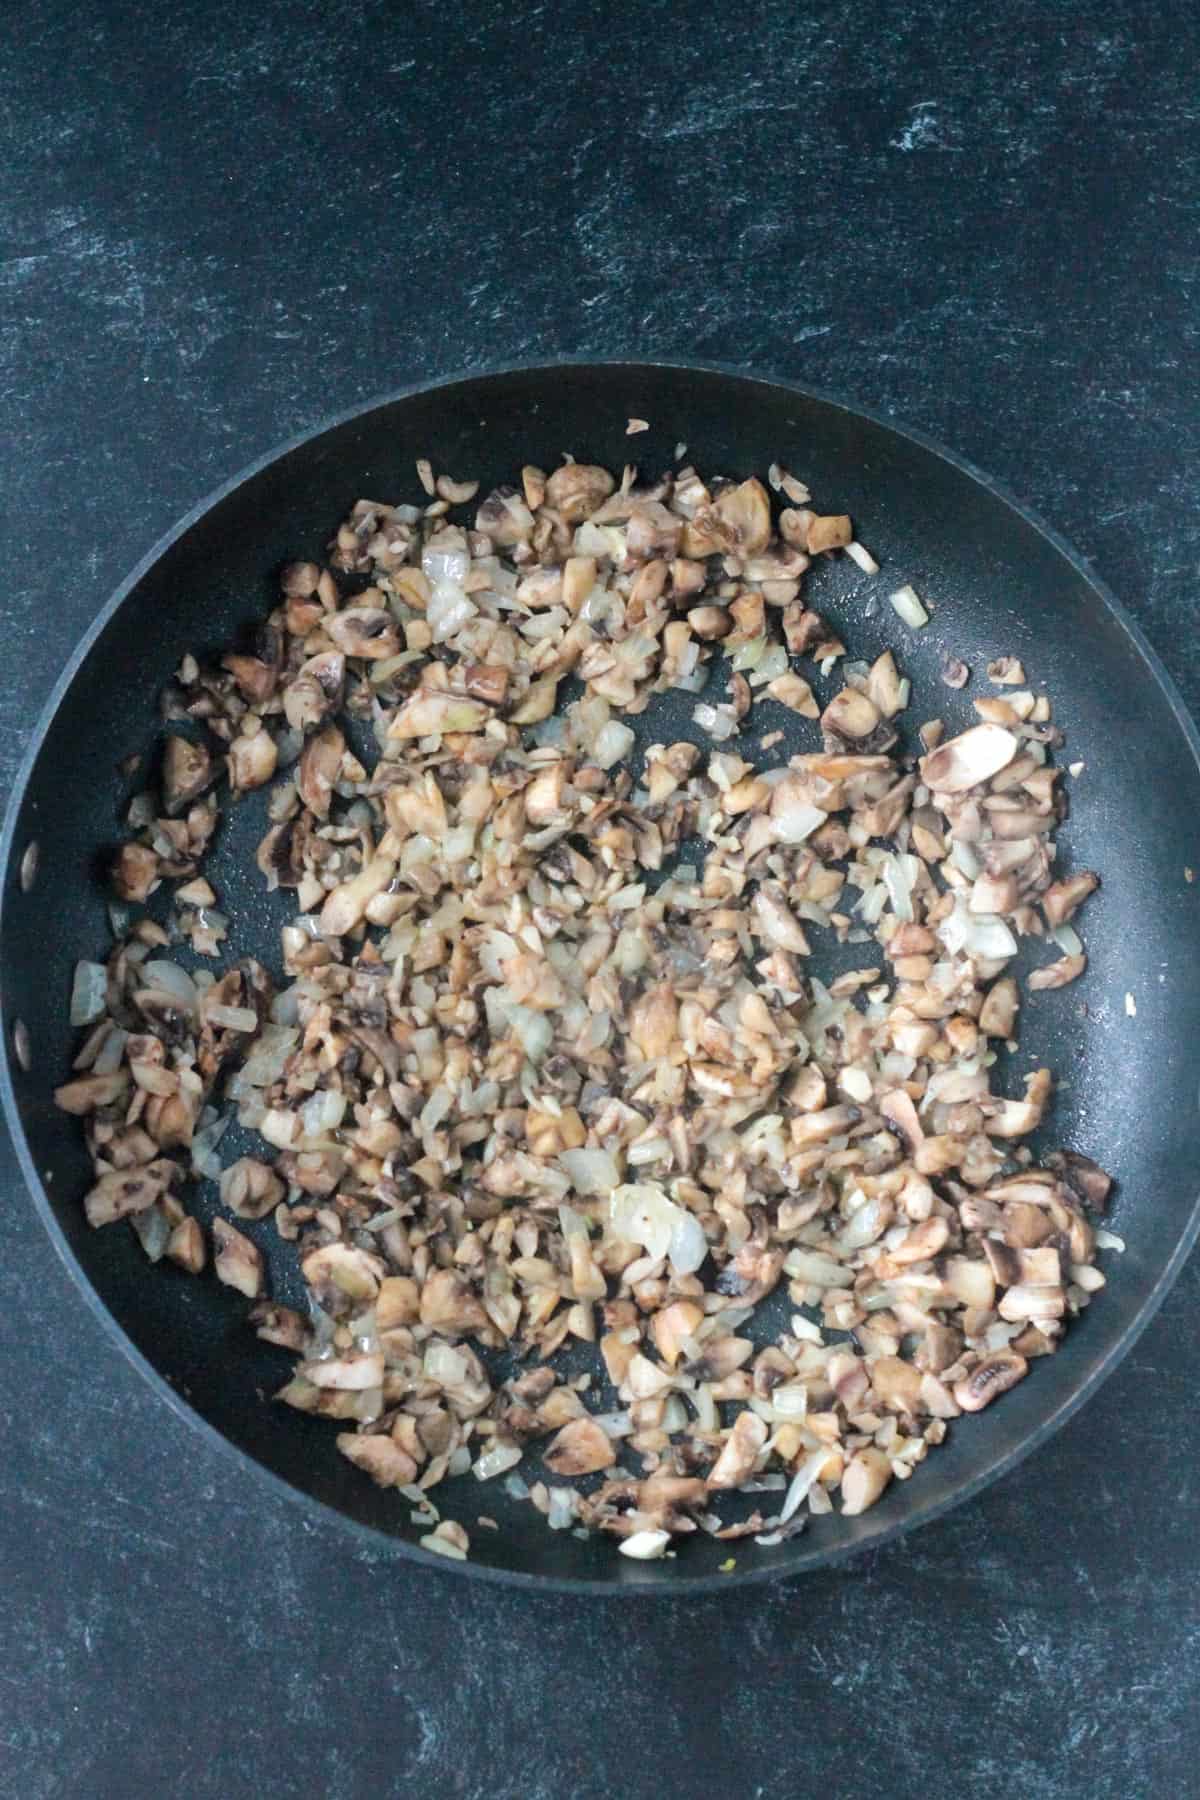 Cooked mushrooms in a skillet.